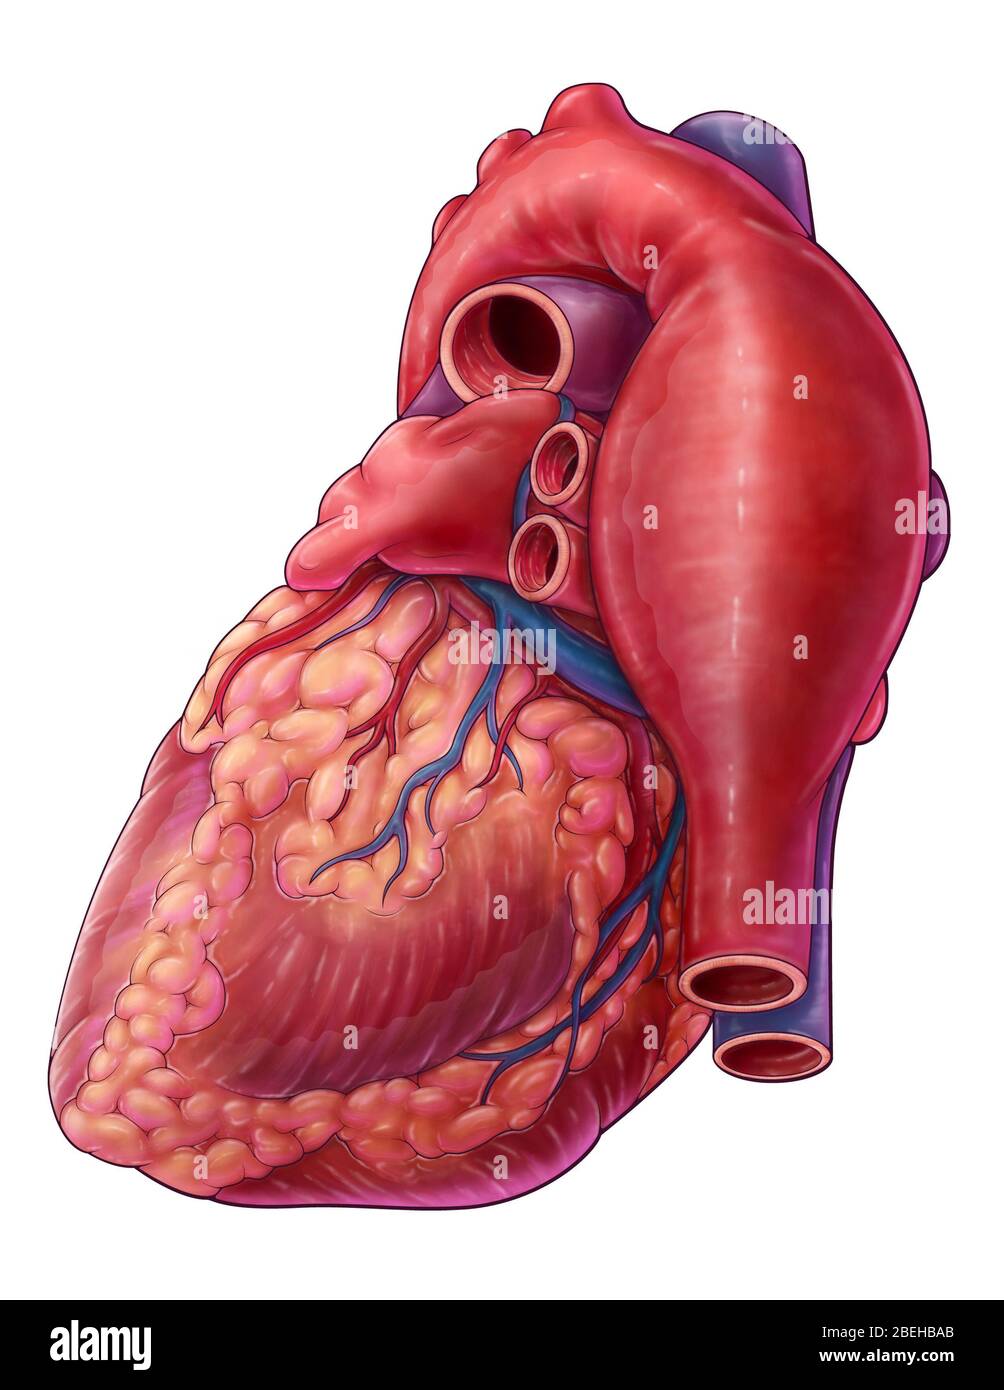 Thoracic Aorta High Resolution Stock Photography And Images Alamy